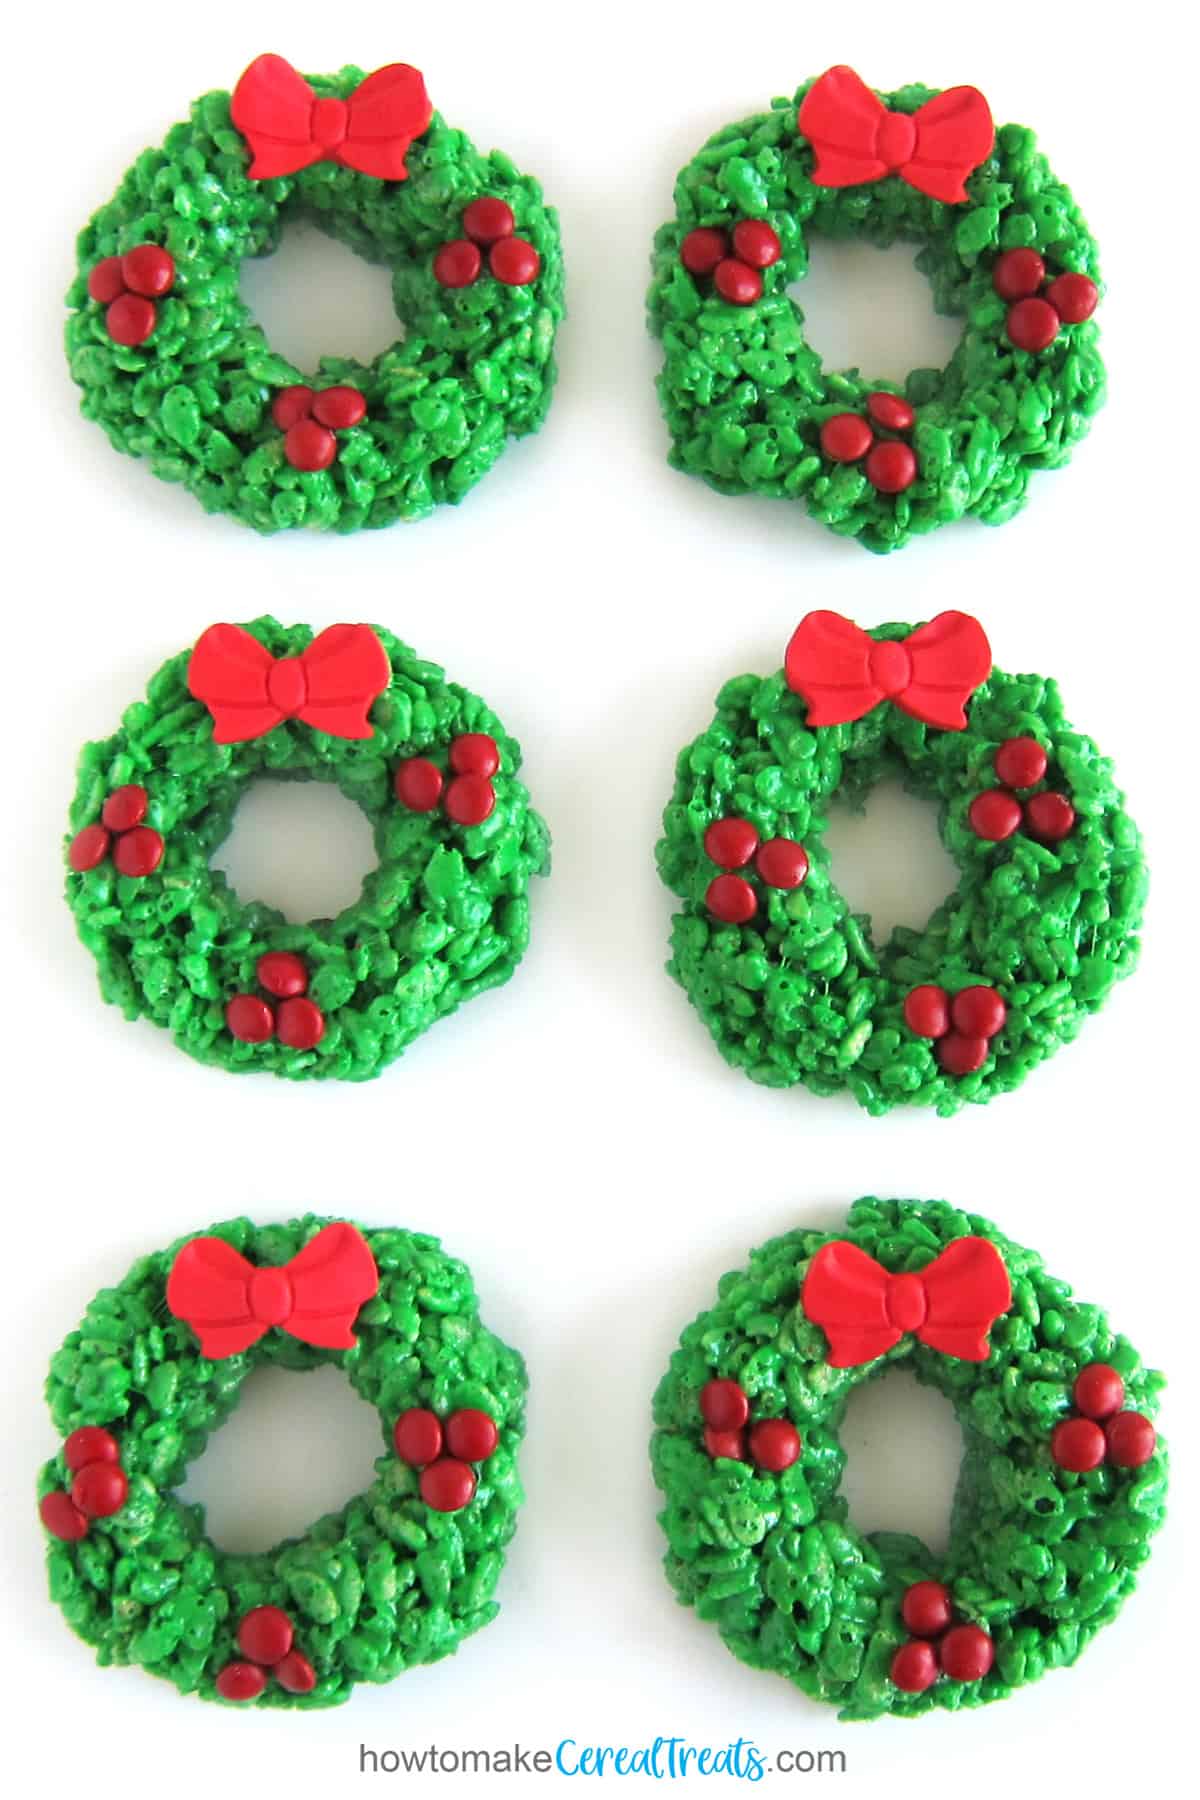 green Rice Krispie treat wreaths with mini M&M berries and a red modeling chocolate bow